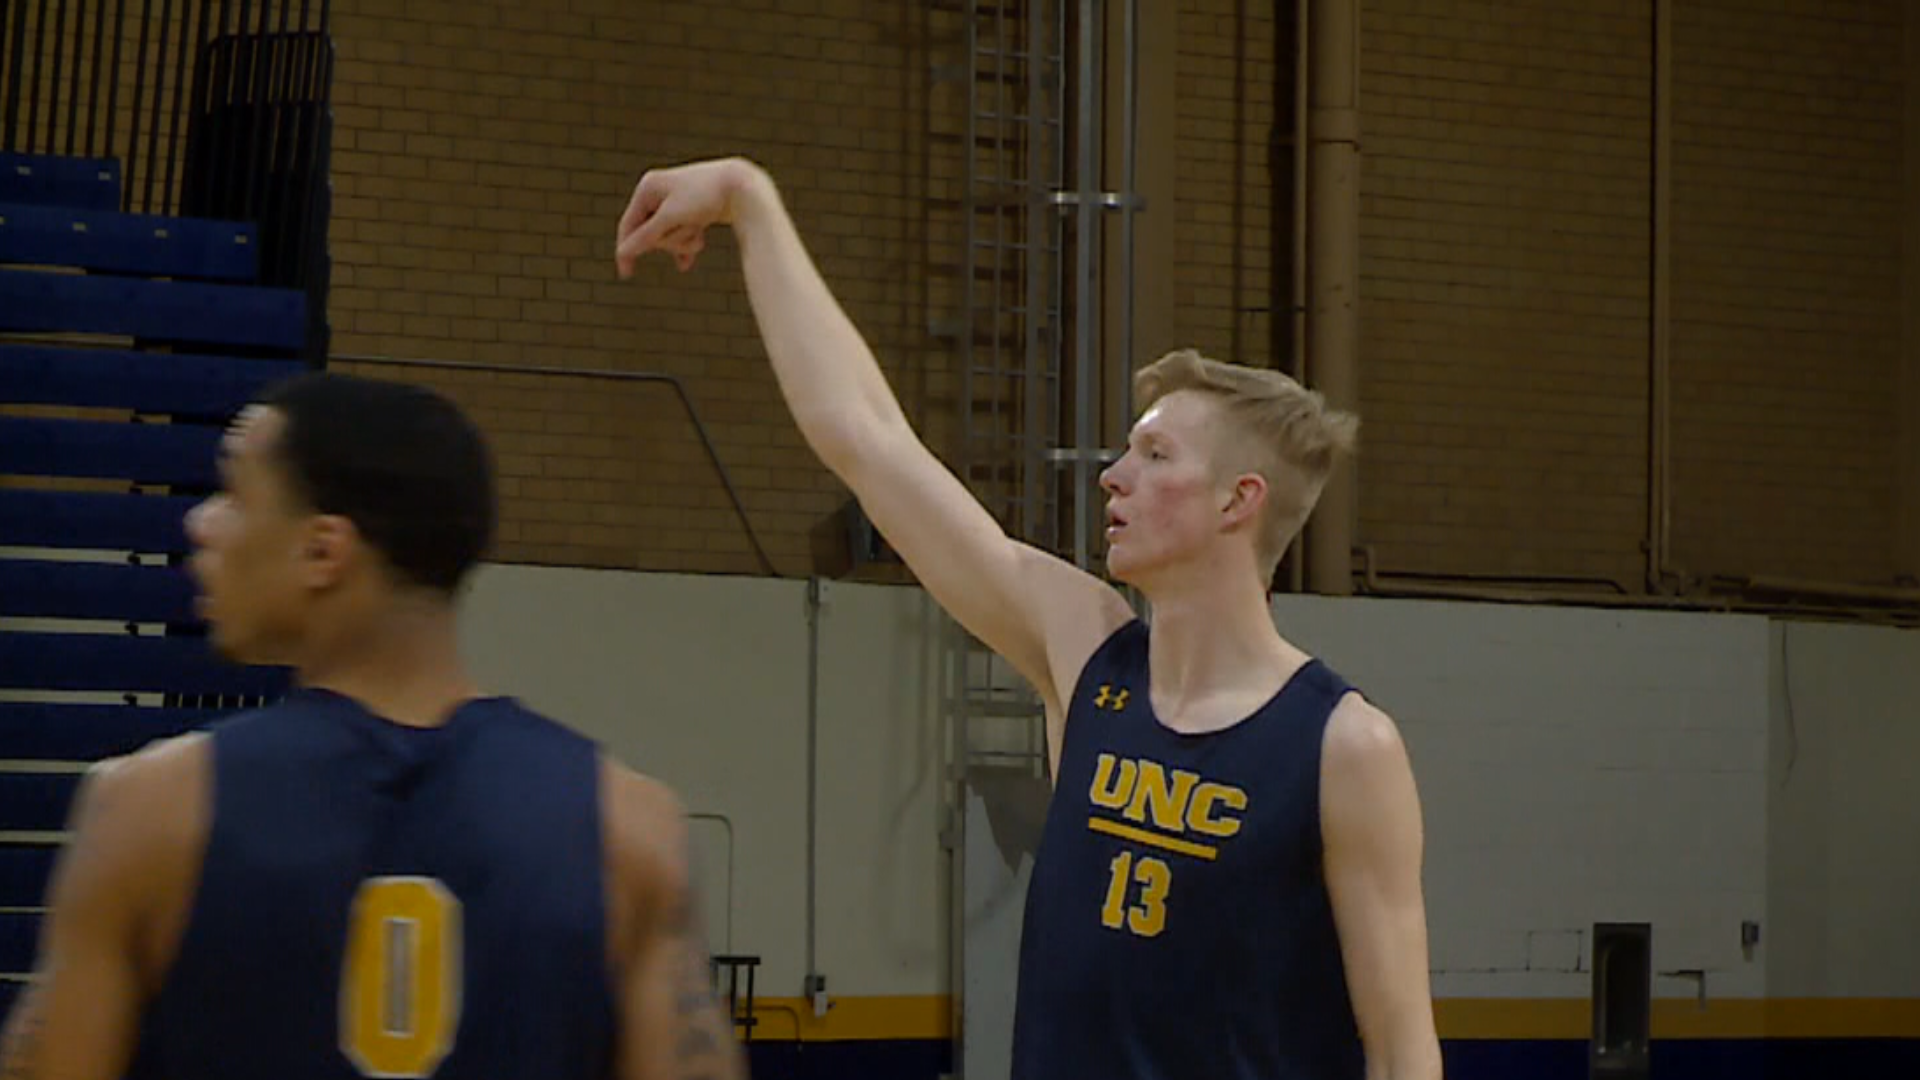 Northern Colorado freshman Bodie Hume is helping the Bears men's basketball program in his first season.